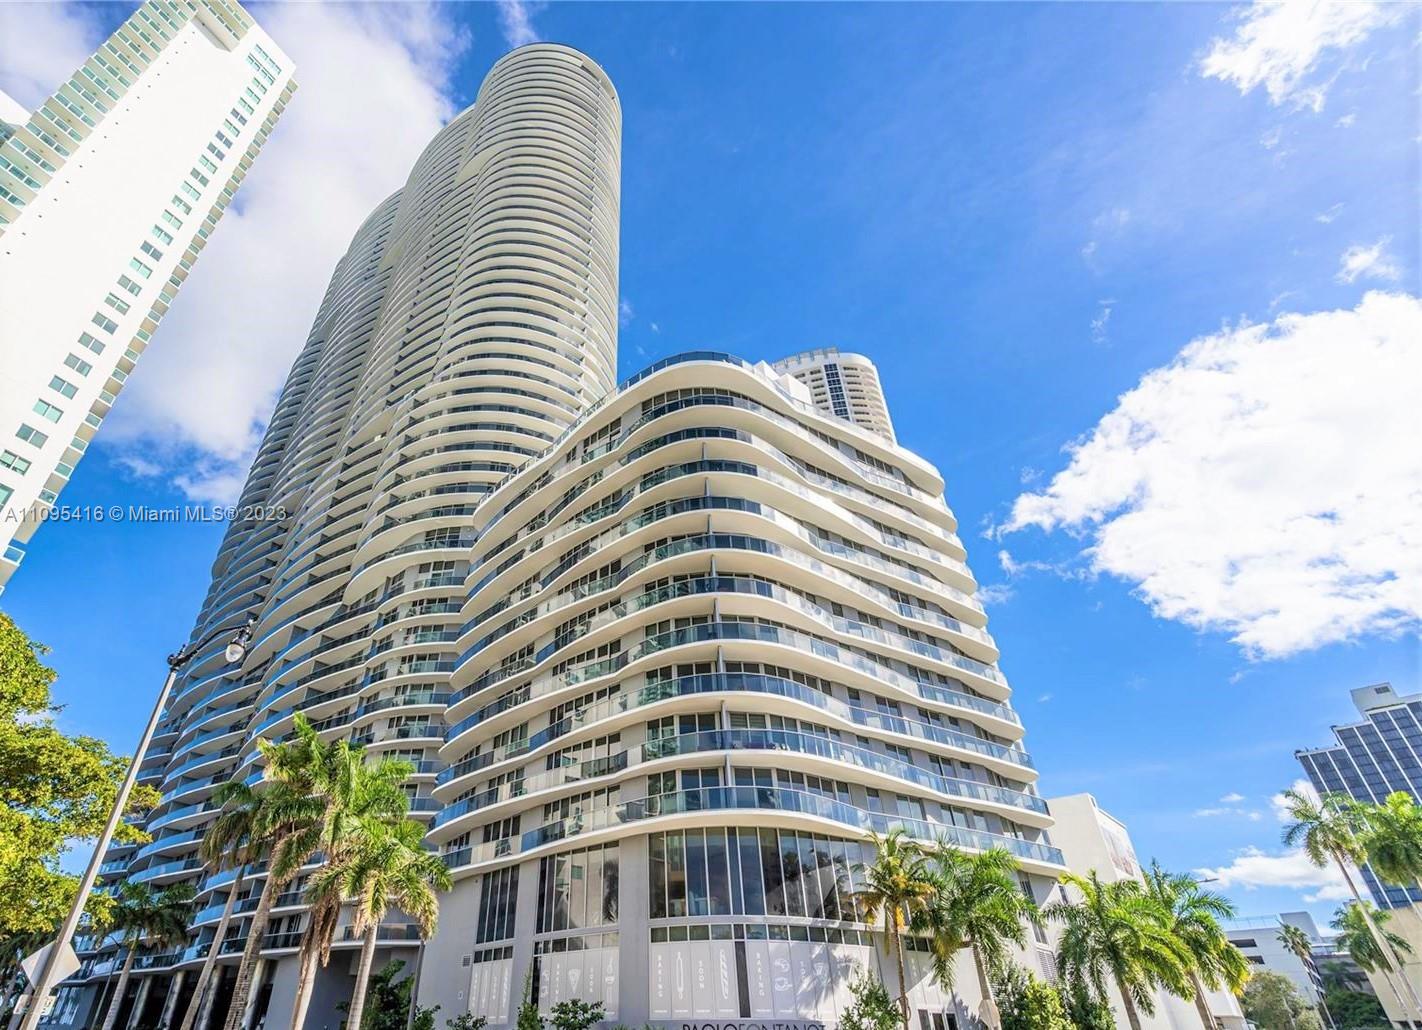 Gorgeous 3 bedrooms, 3.5 baths, floor-to-ceiling glass, European-style kitchen Bosch appliances, European cabinetry. Window treatments, custom walk-in closets. Impeccably furnished with beautiful views of the bay and the city. Live at Miami's hottest neighborhood Edgewater/Wynwood, in the city's most desirable luxury waterfront building in front of the Park. Five-star resort style amenities include sunrise and sunset heated pools, hot tub overlooking the Bay, BBQ, spa, sauna, steam room, resident's lounge with a private party room, business center, fitness center, yoga and pilates studio, movie theater, kid's playroom and more. Centrally located - close to Key Biscayne, 5 minutes to SoBe, Brickell, downtown, Wynwood, Design District. Unit is rented for $6,300 until October 2022